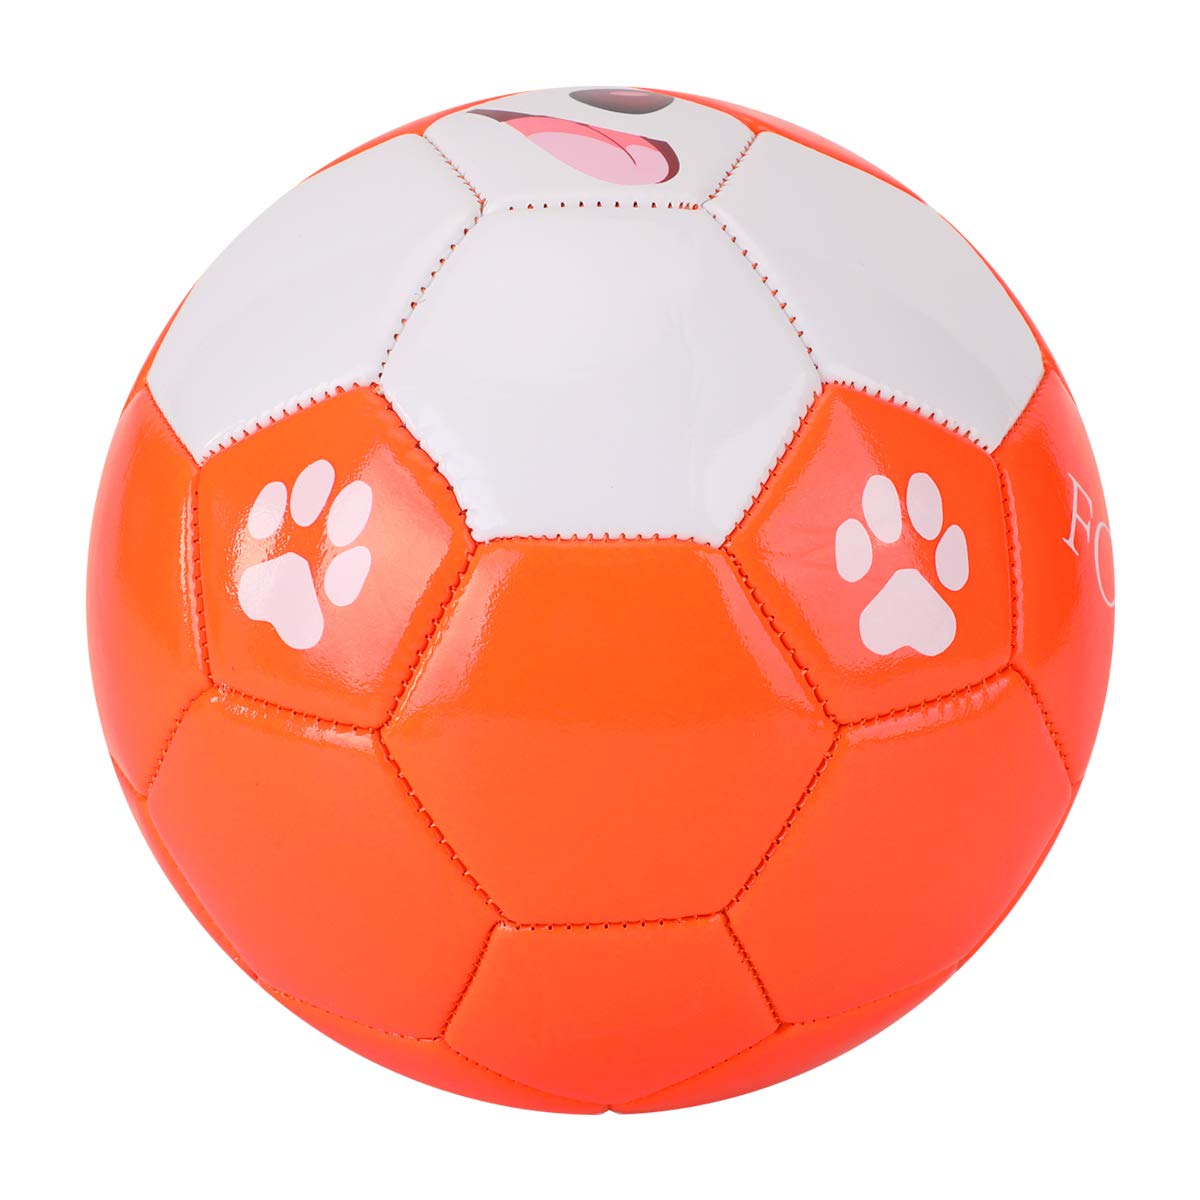 EVERICH TOY Soccer Ball Size 2 Soccer Balls for Kids-Sport Ball for Toddlers-Backyard Lawn Sand Outdoor Toys for Boys and Girls,Including Pump